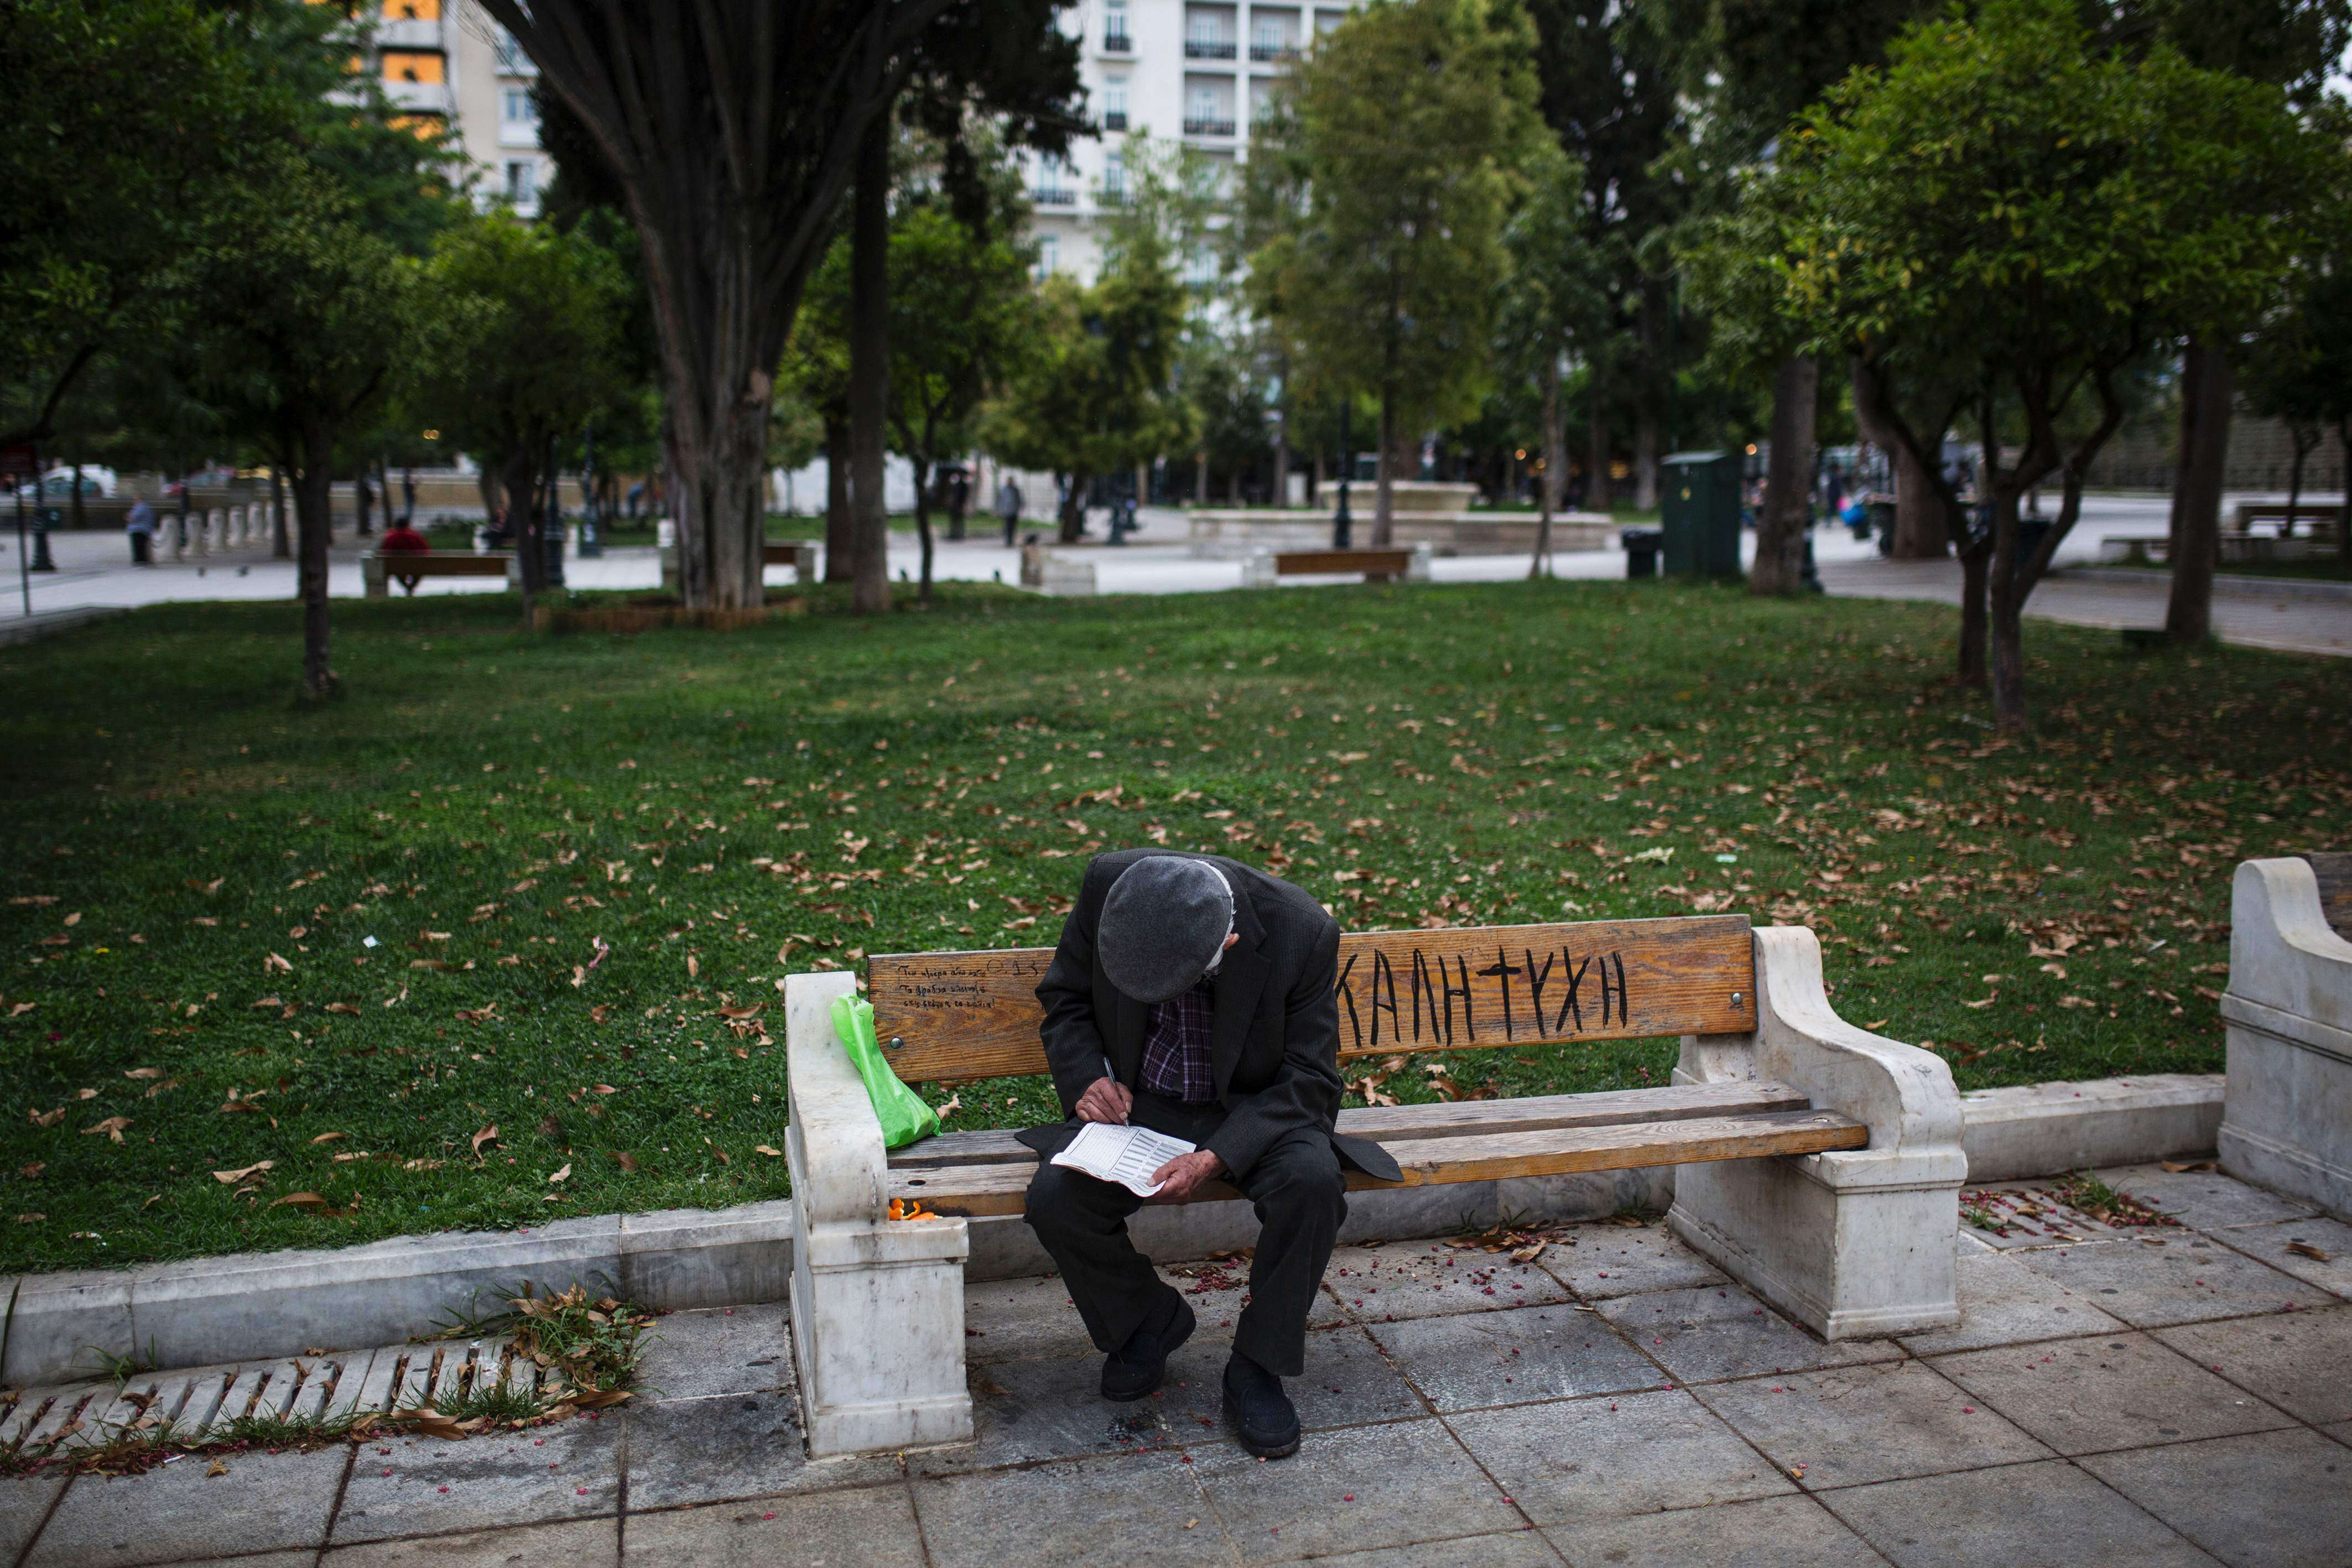 A man looks at a crossword puzzle as he sits on bench in Syntagma Square in Athens on May 22, 2016. Greece on May 22 was set to adopt fresh cuts and tax hikes ahead of a Eurogroup meeting that is expected to unlock desperately-needed bailout funds for the debt-ridden nation. Photo: AFP